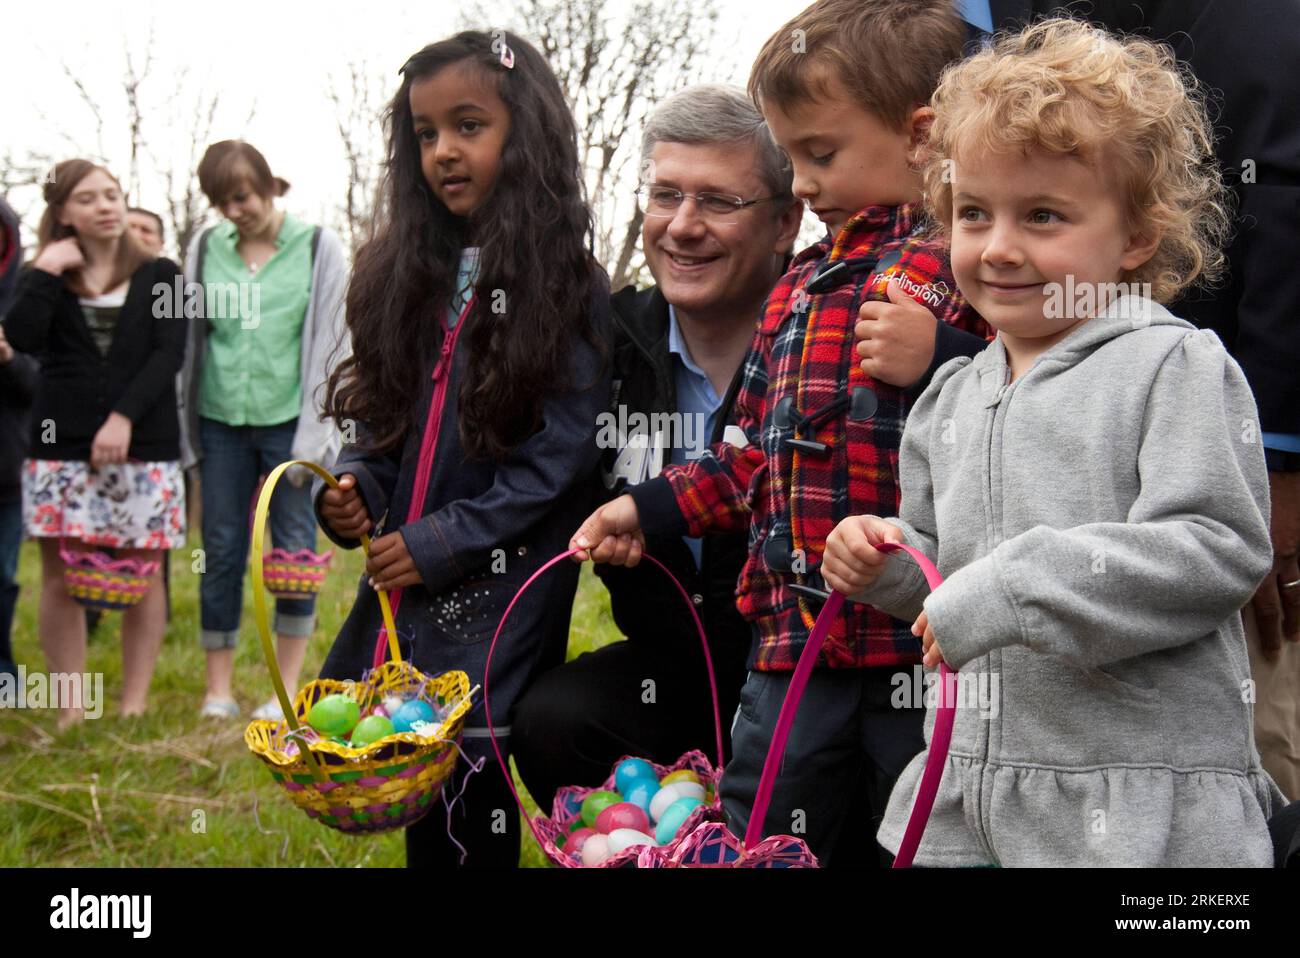 Bildnummer: 55287145  Datum: 24.04.2011  Copyright: imago/Xinhua (110425) -- VANCOUVER, April 25, 2011 (Xinhua) -- Canadian Prime Minister and Conservative Party leader Stephen Harper goes Easter egg hunting with local children in Burnaby, British Columbia, Canada, April 24, 2011. Harper was on a campaign trip for the 41st federal election set on May 2. (Xinhua/Conservative Party of Canada) CANADA-BRITISH COLUMBIA-HARPER-CAMPAIGN PUBLICATIONxNOTxINxCHN People Politik Wahl Präsidentschaftswahlen Wahlen Wahlkampf Kanada kbdig xdp 2011 quer premiumd  o0 Ostern, Osterei, Ei, Suche, Eiersuche, Oste Stock Photo